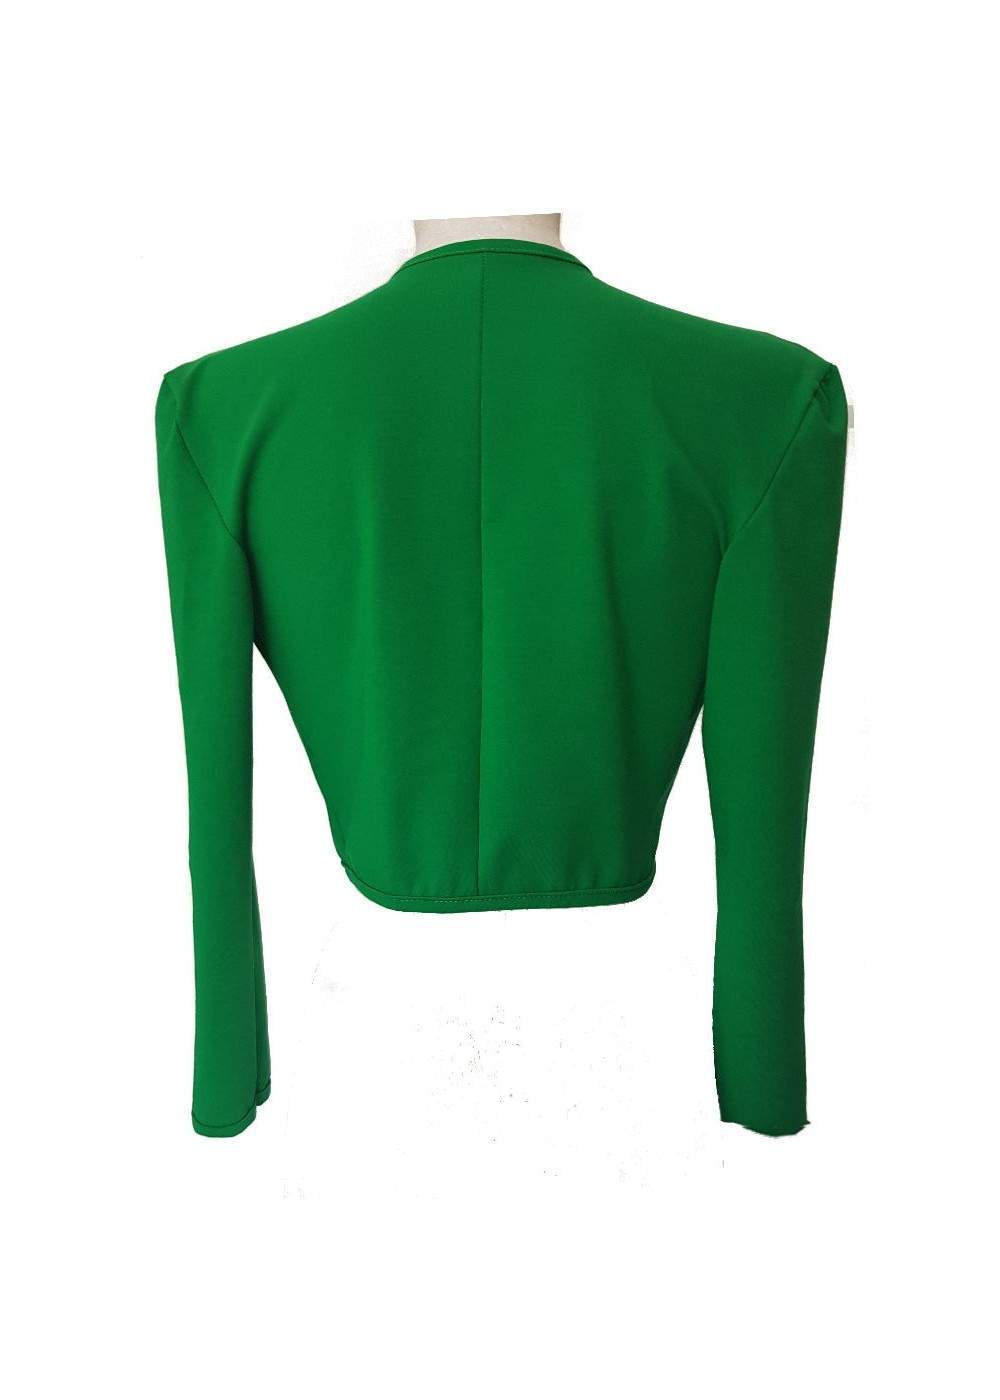 Sizes 34 - 52 Green Cotton Stretch Short Jacket from Magdeburg Prod... - 